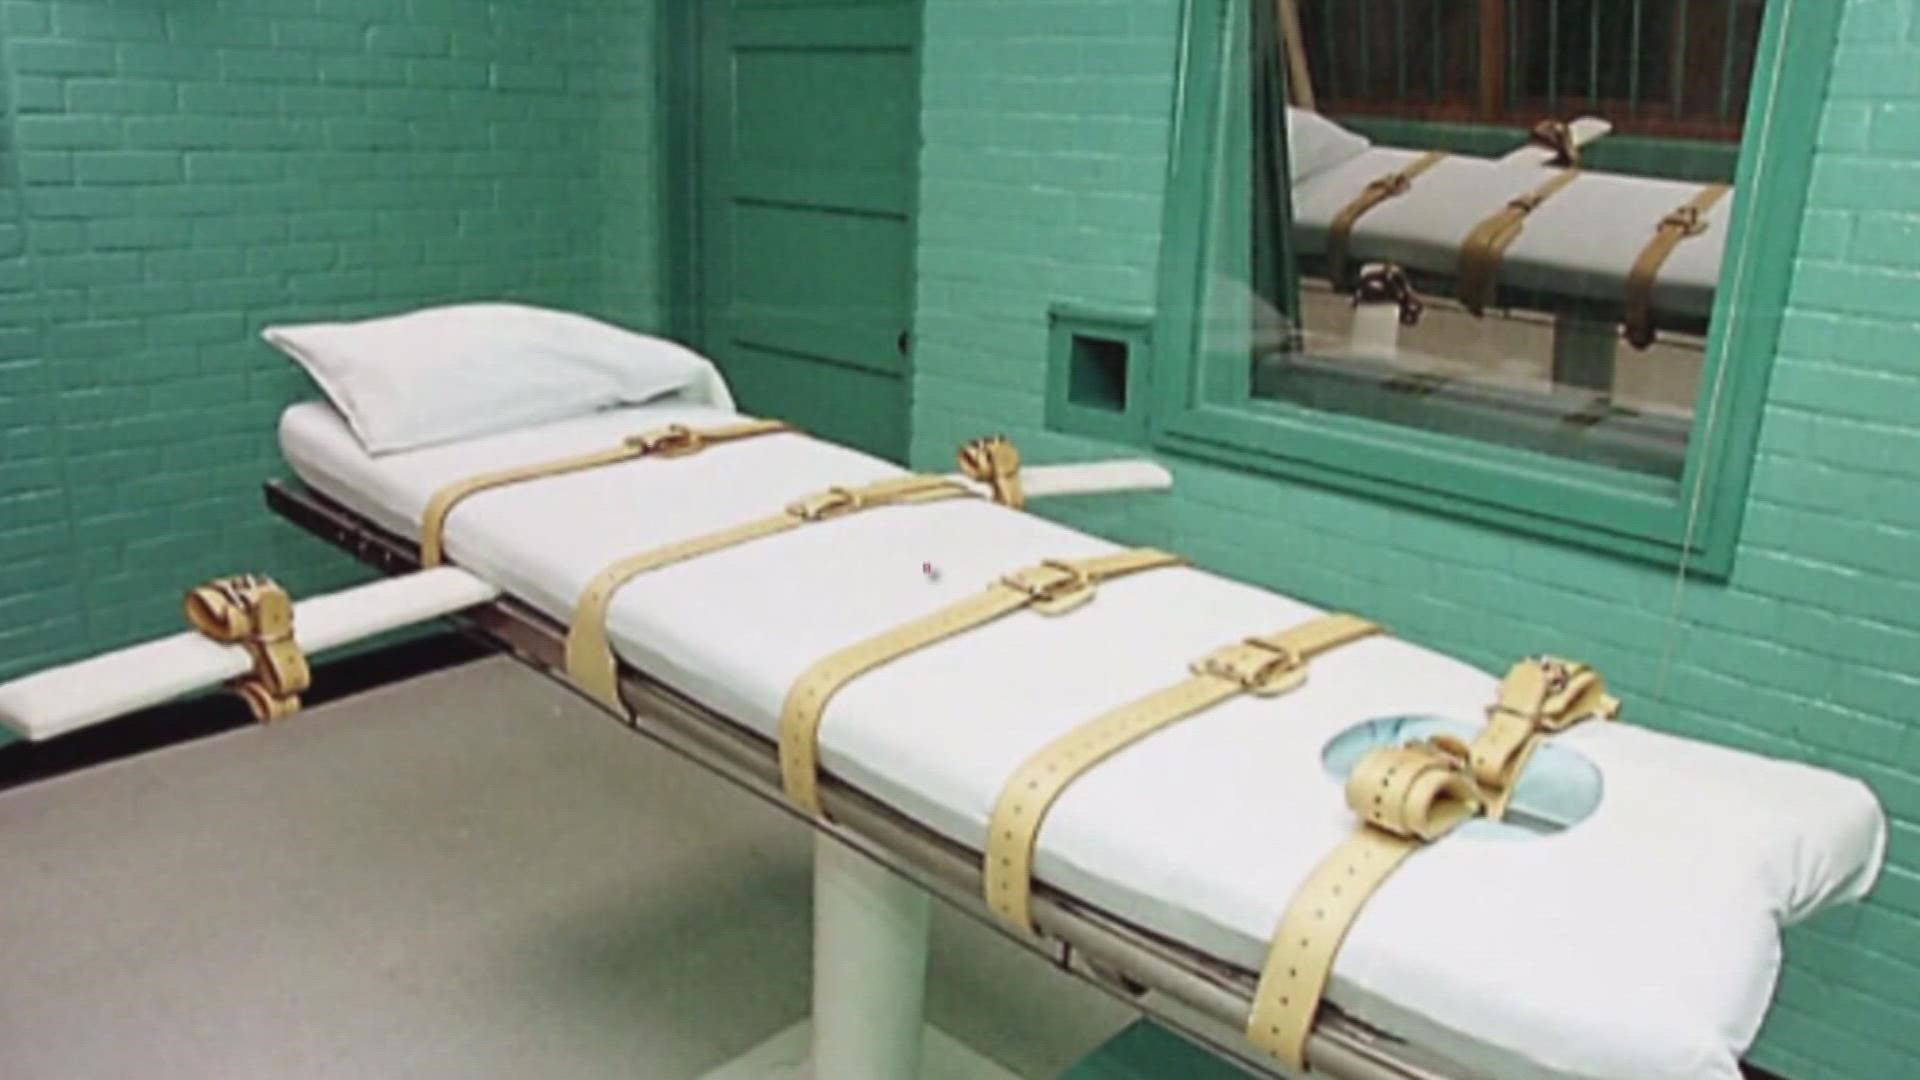 The newly elected Governor is calling for a review of the execution system.